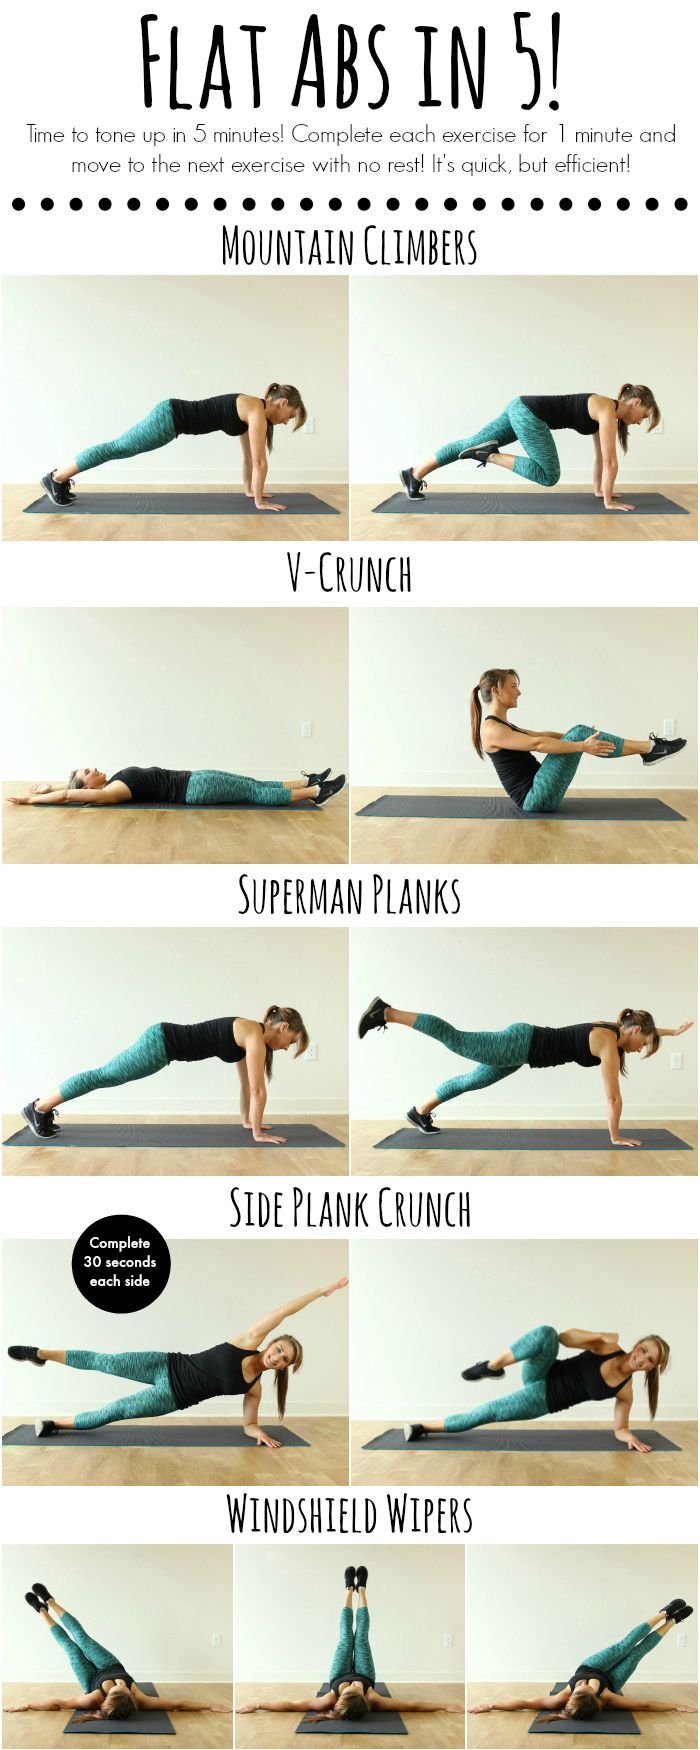 9 Amazing Flat Belly Workouts To Help Sculpt Your Abs! – TrimmedandToned